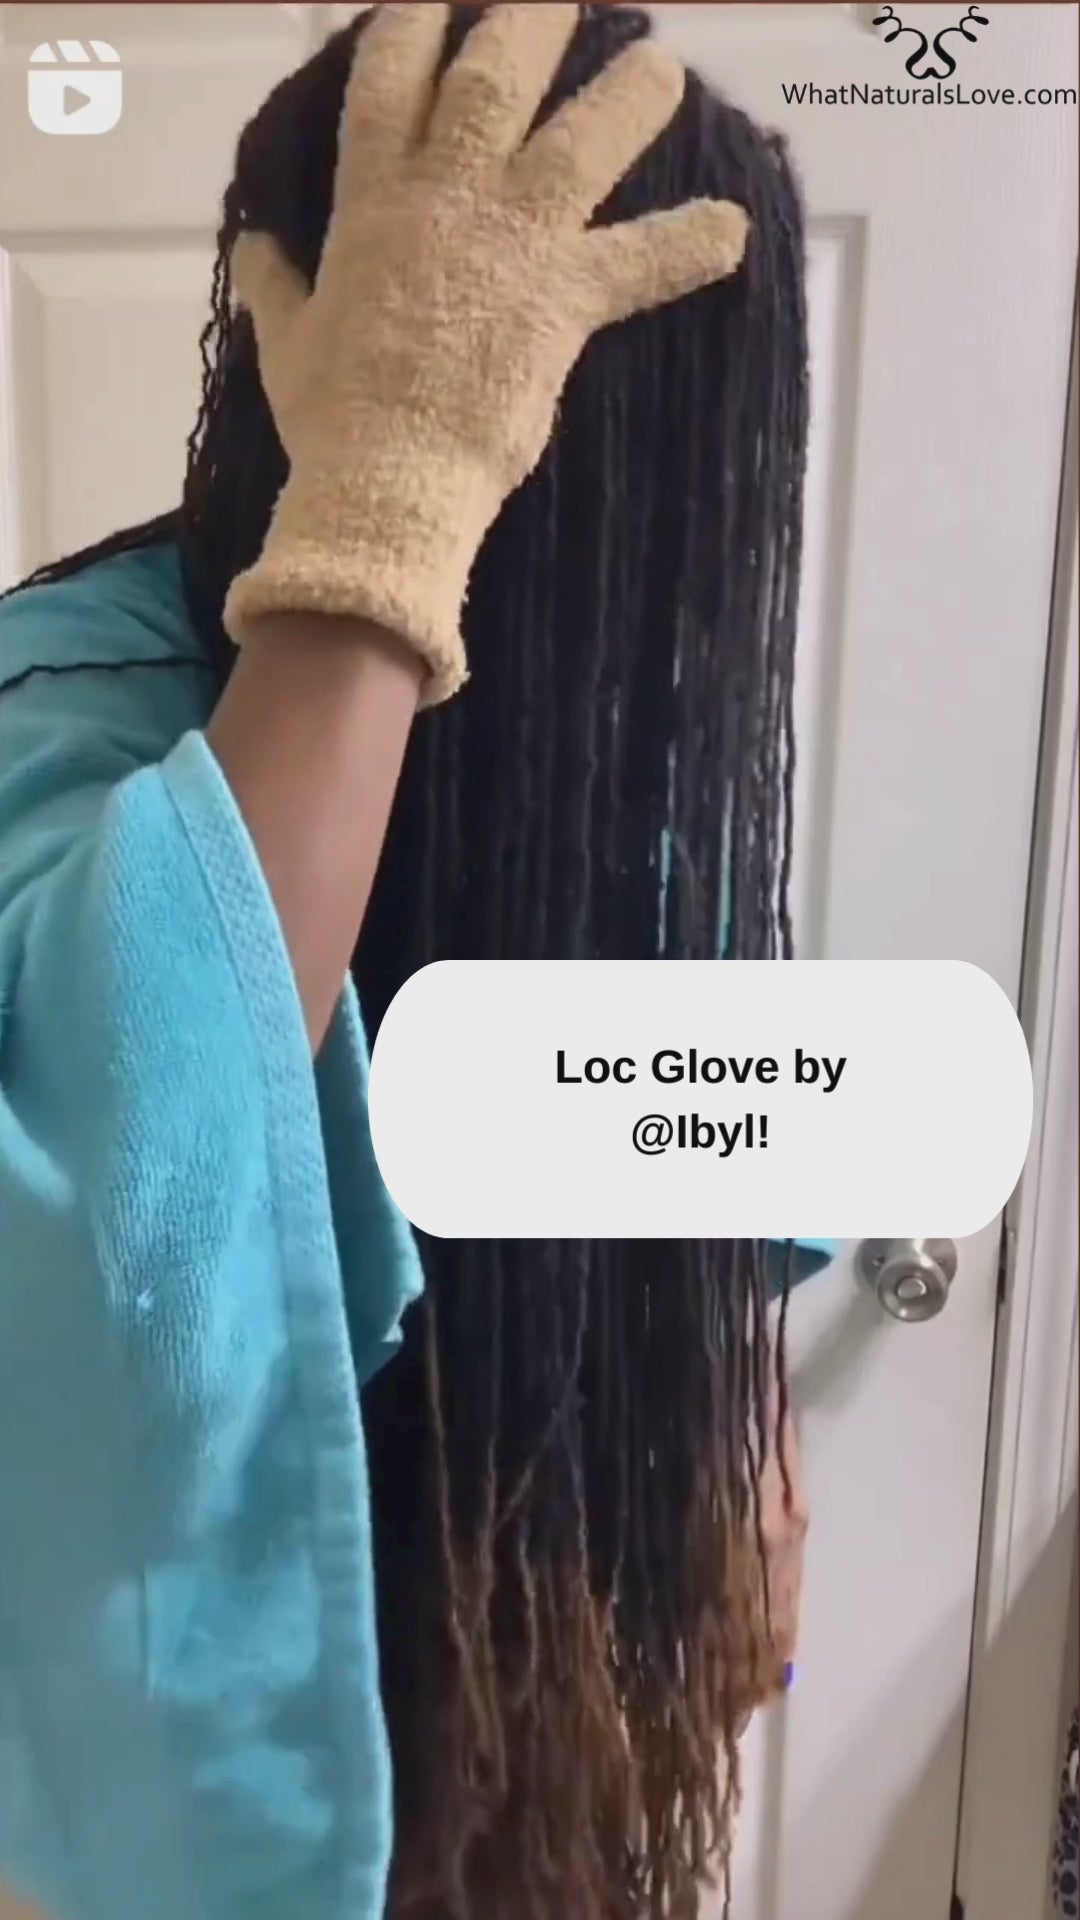 Loc Glove to clean, maintain and dry locs Success